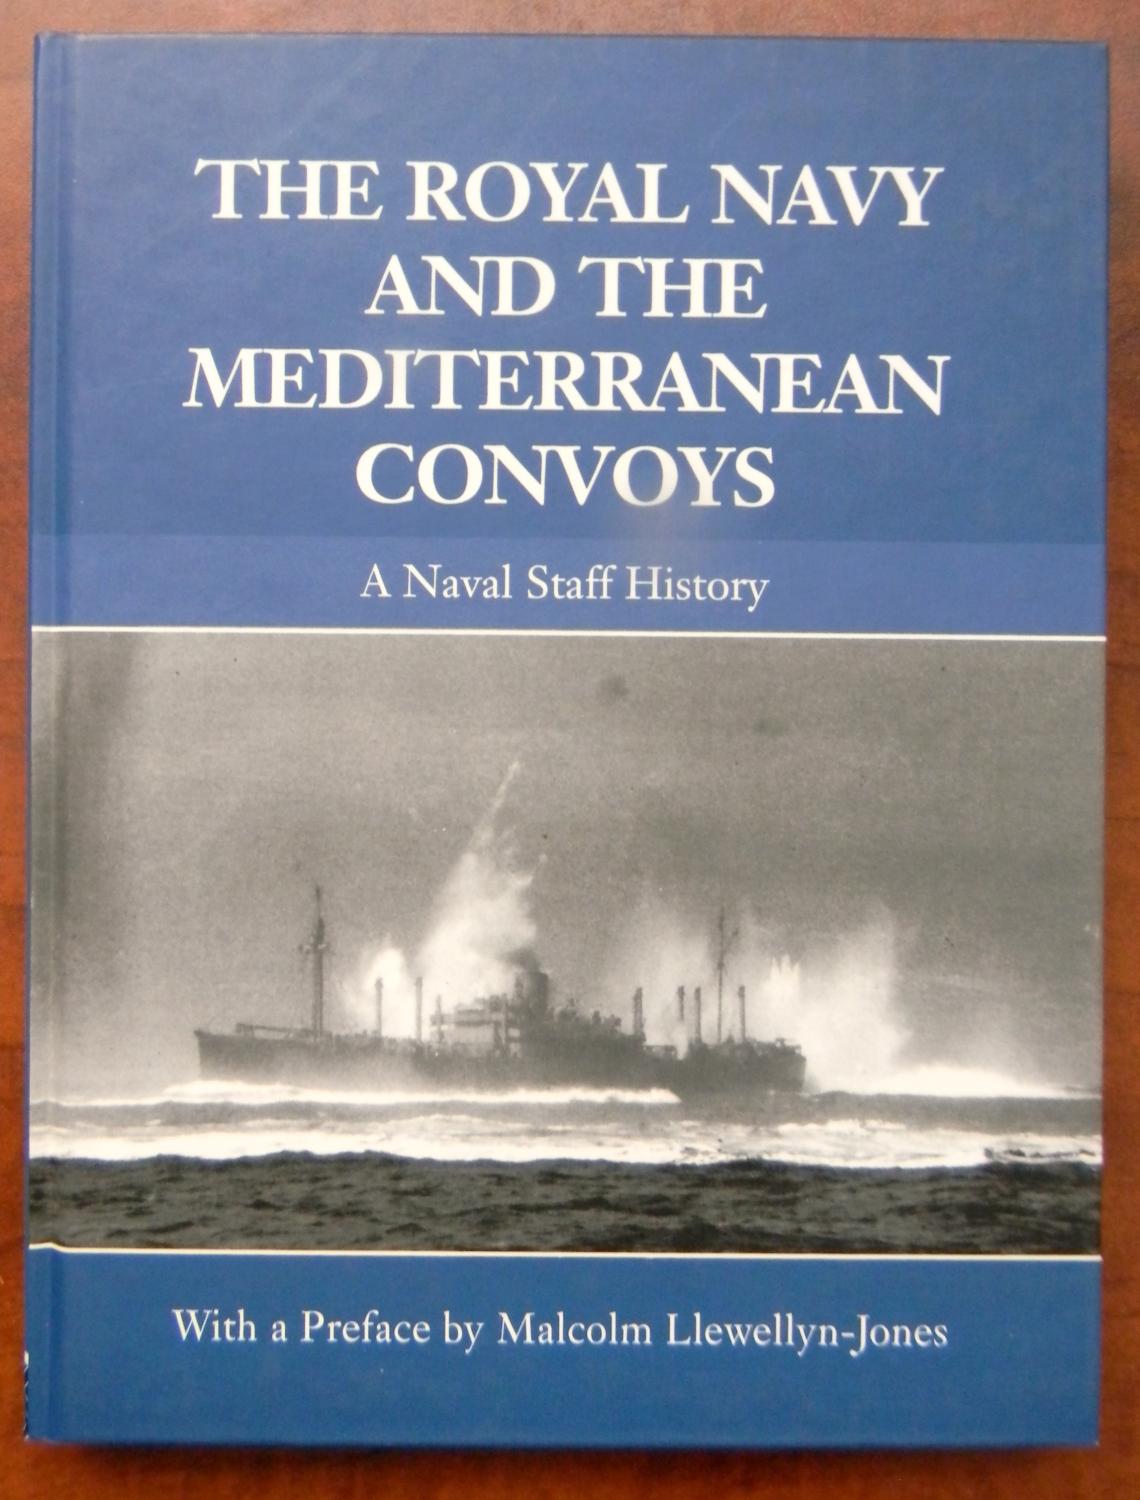 THE ROYAL NAVY AND THE MEDITERRANEAN CONVOYS, A NAVAL STAFF HISTORY - Llewellyn-Jones, Malcolm (Ed.)